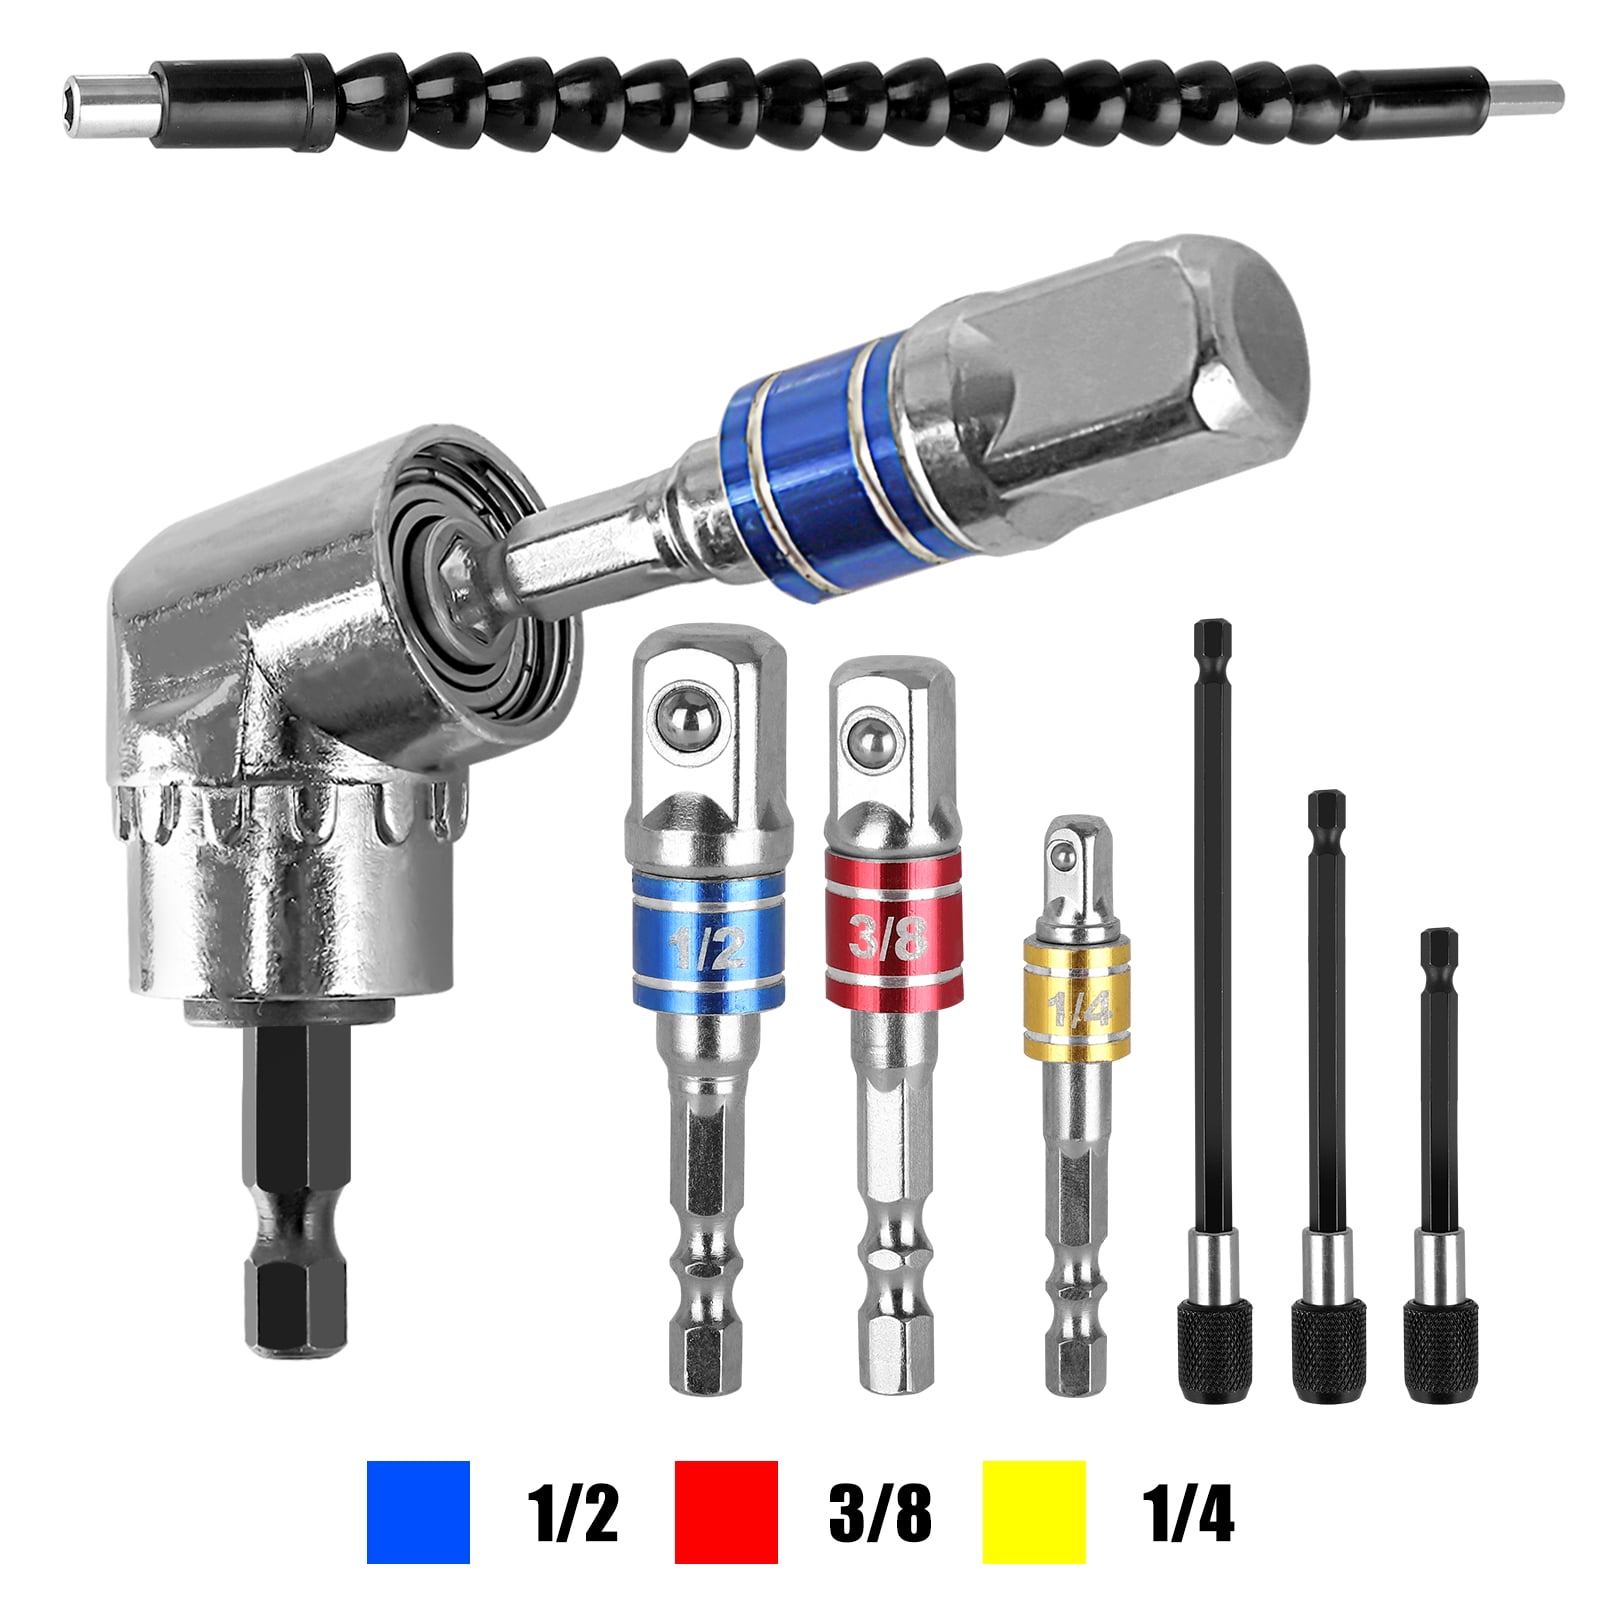 Angle Driver Set Stainless Steel Angle Driver Drill Bit High Hardness Labor‑saving 1/4in,for Manual Use,Power Screwdriver 